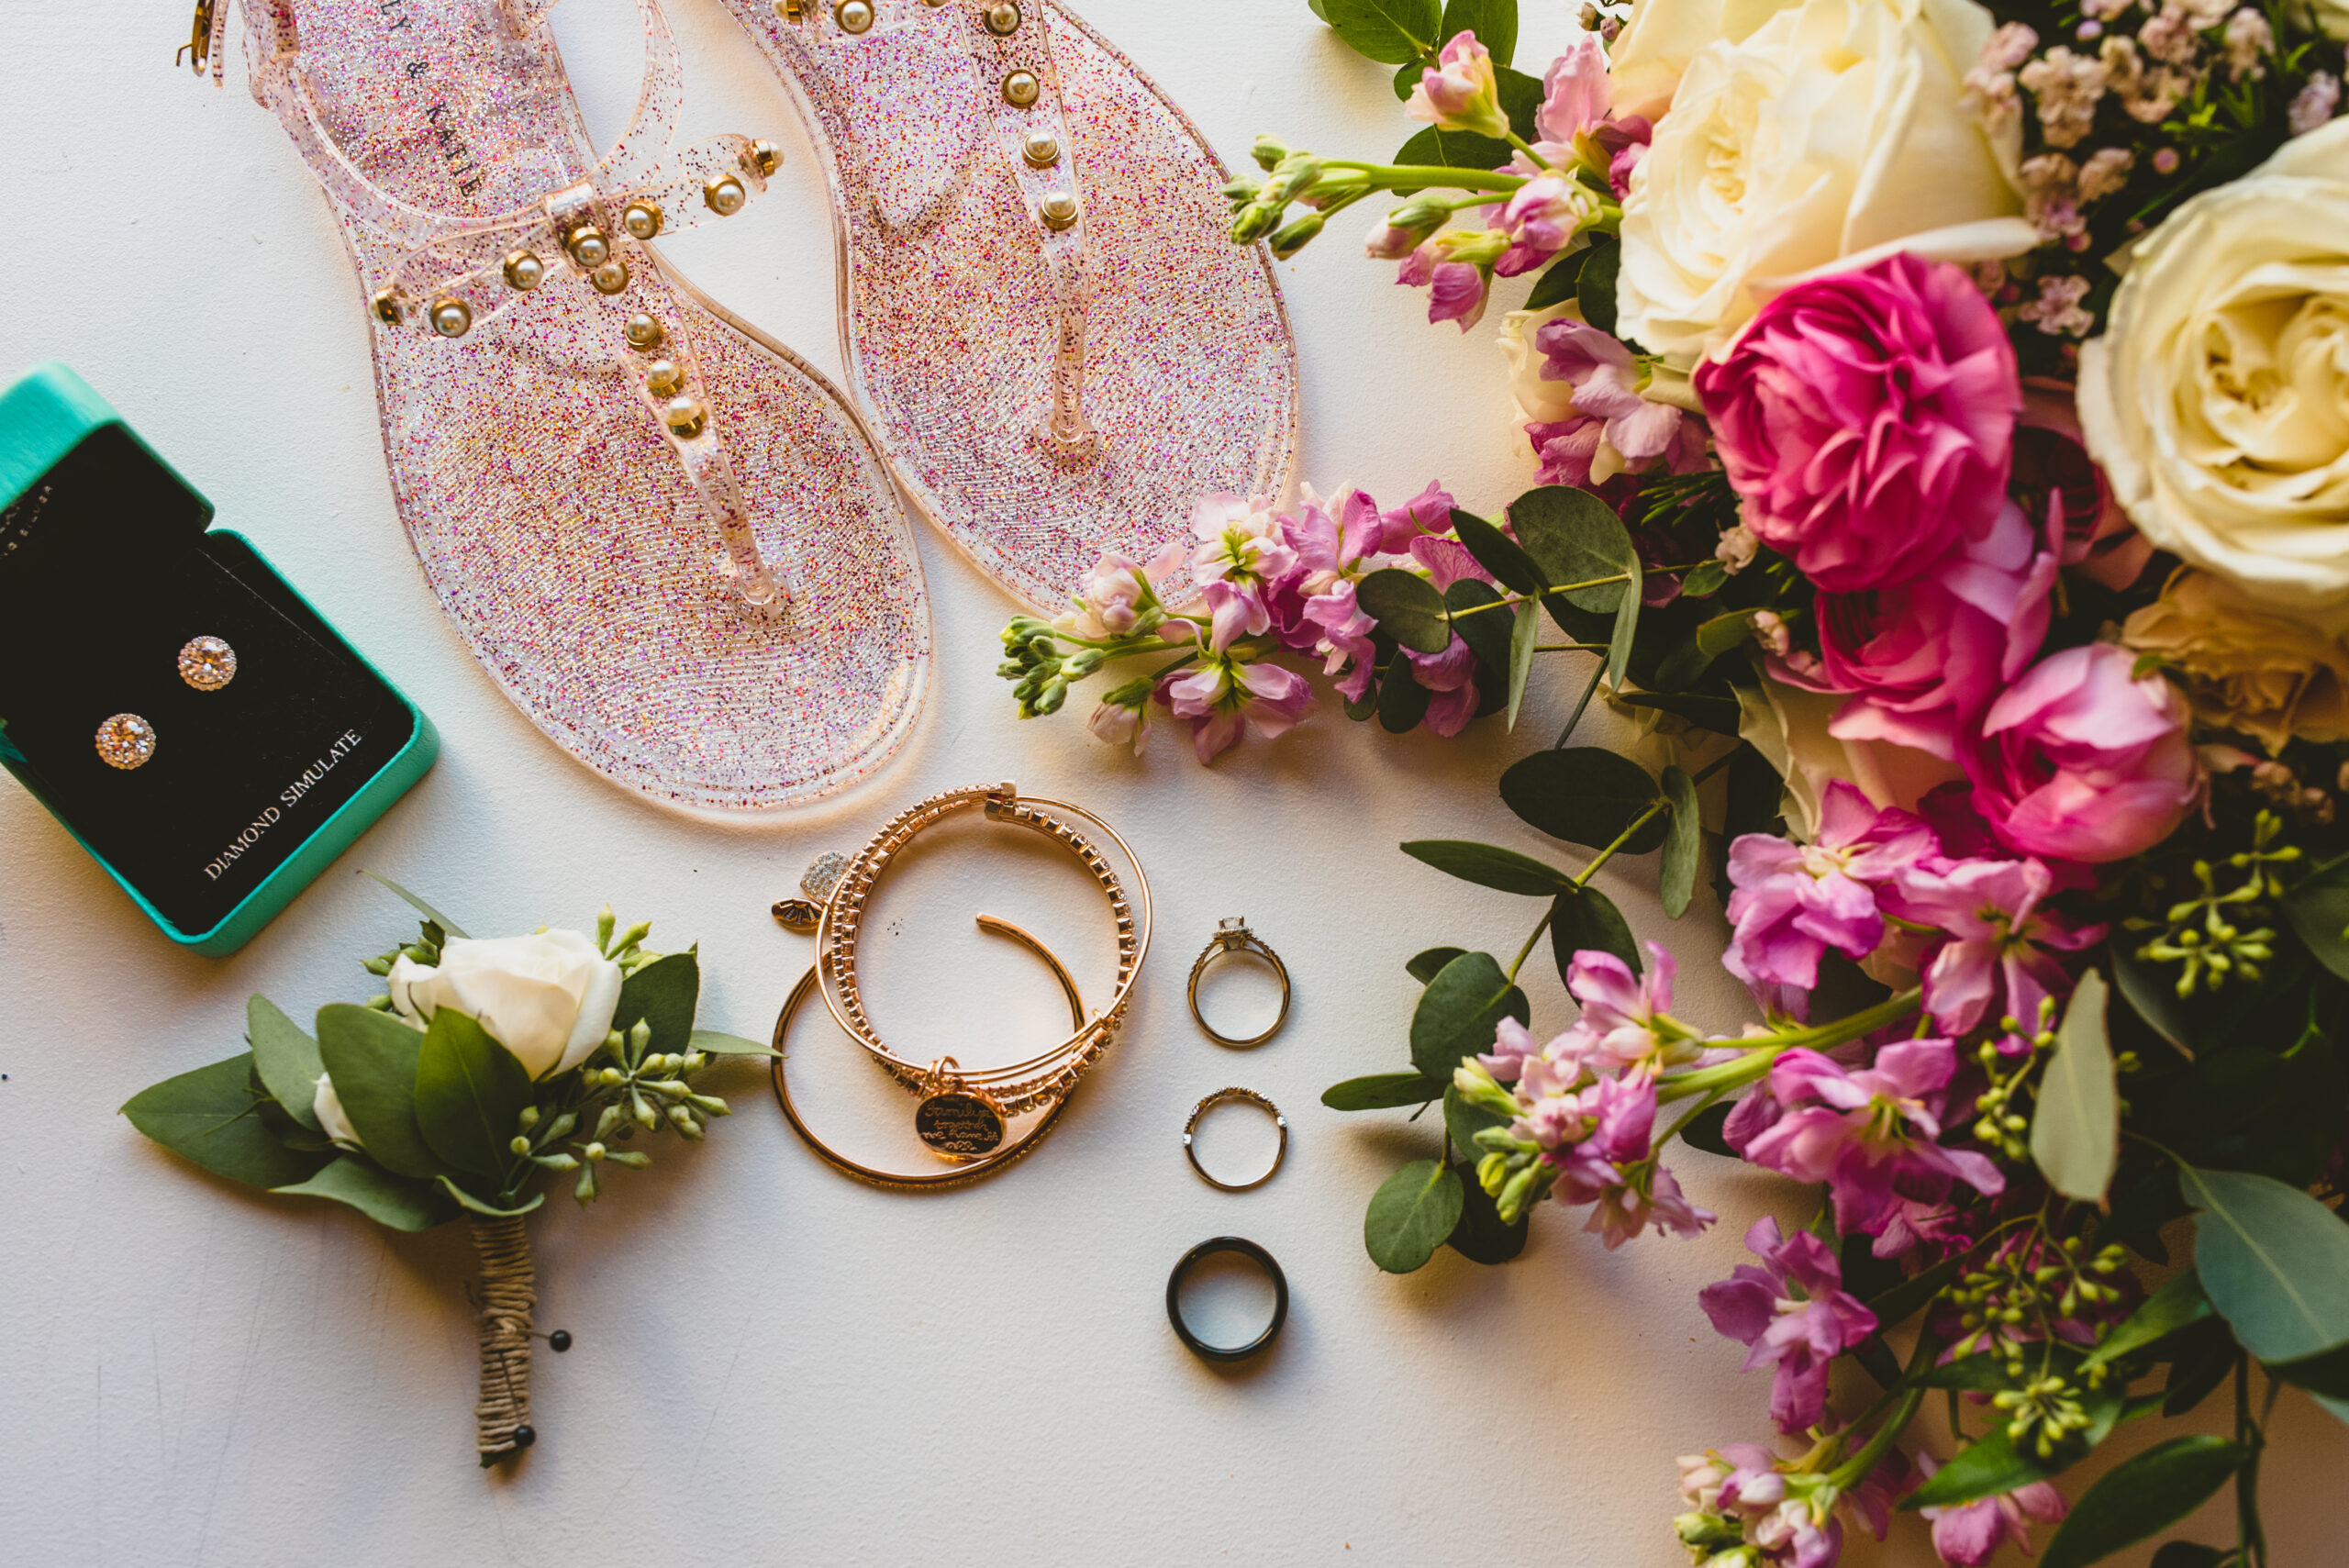 A table with flowers, rings and sandals on it.